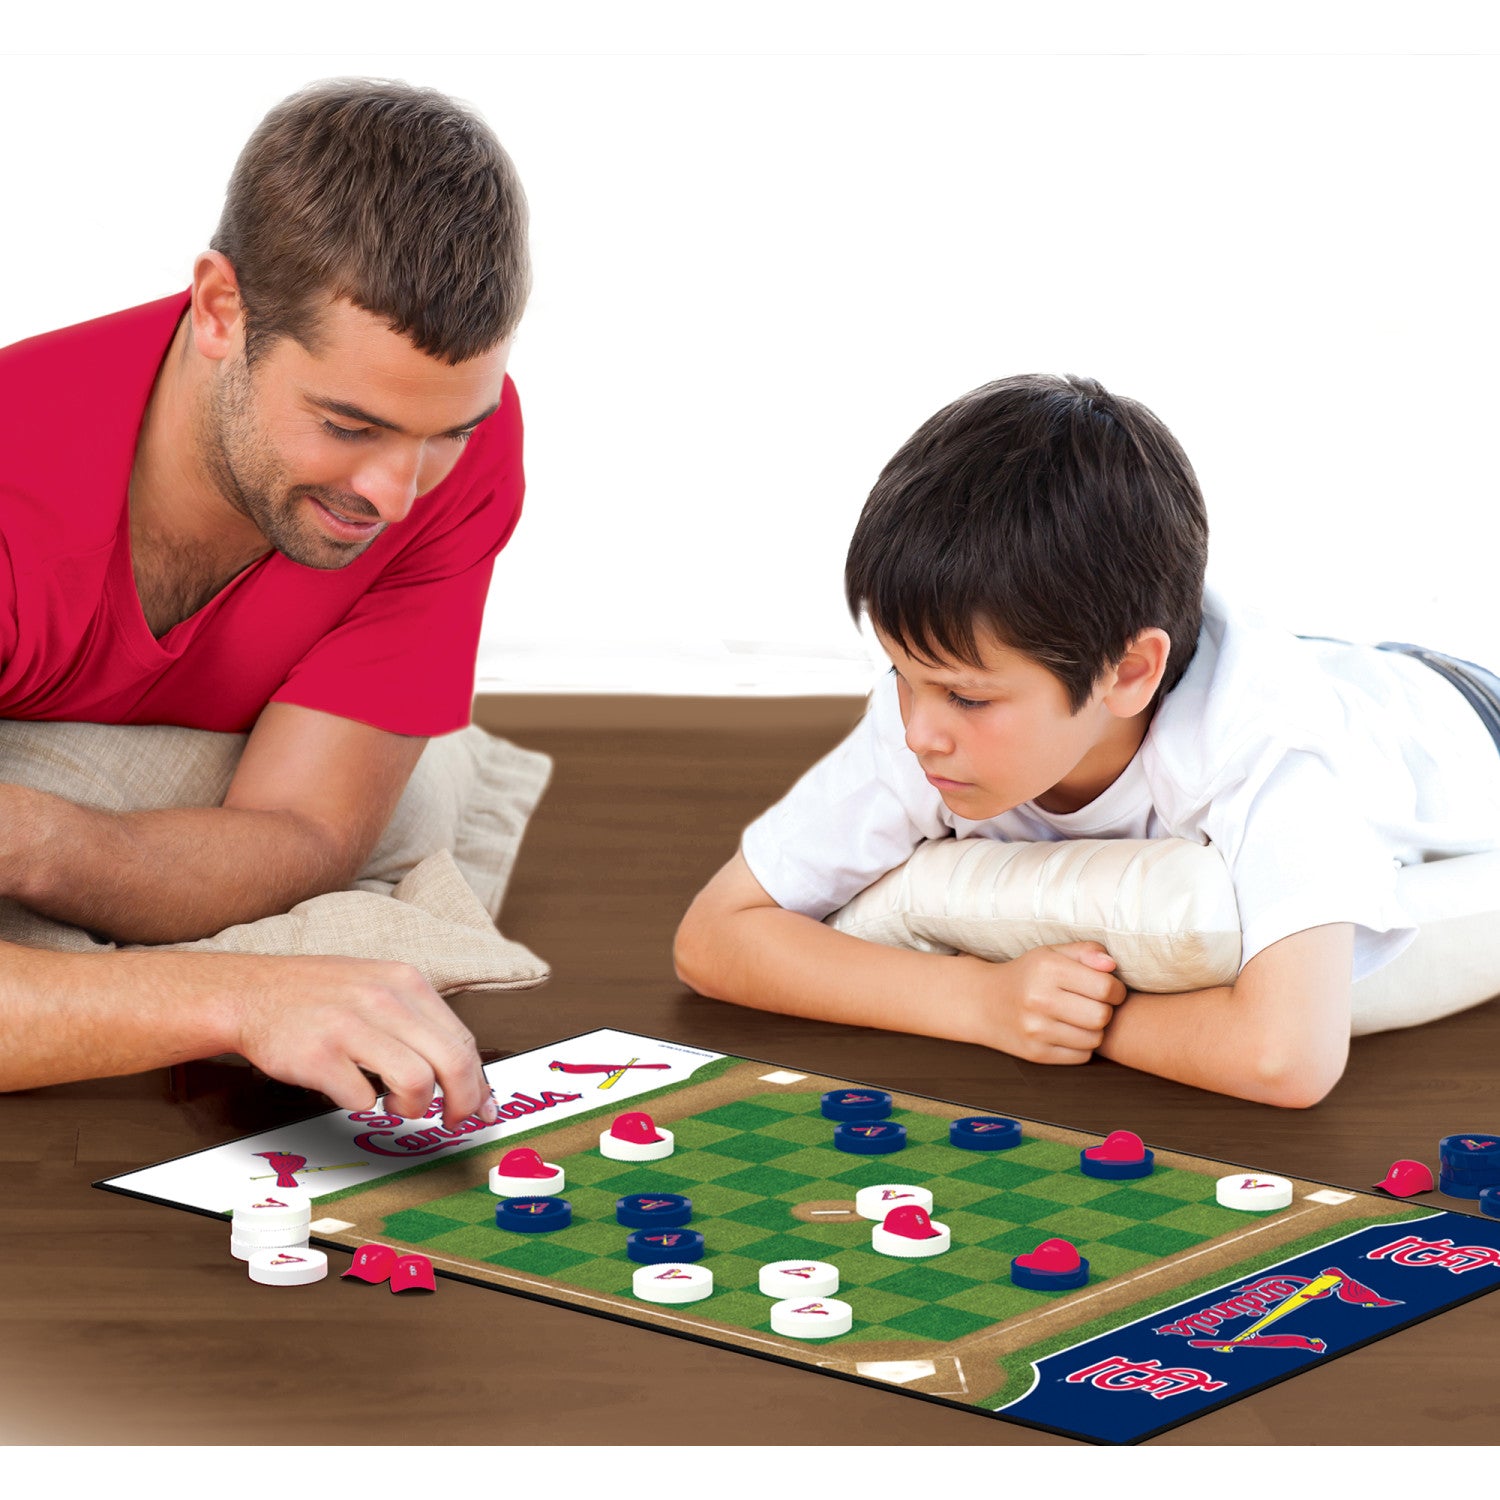 STL Cardinals Toy  St Louis Cardinals Game Checkers